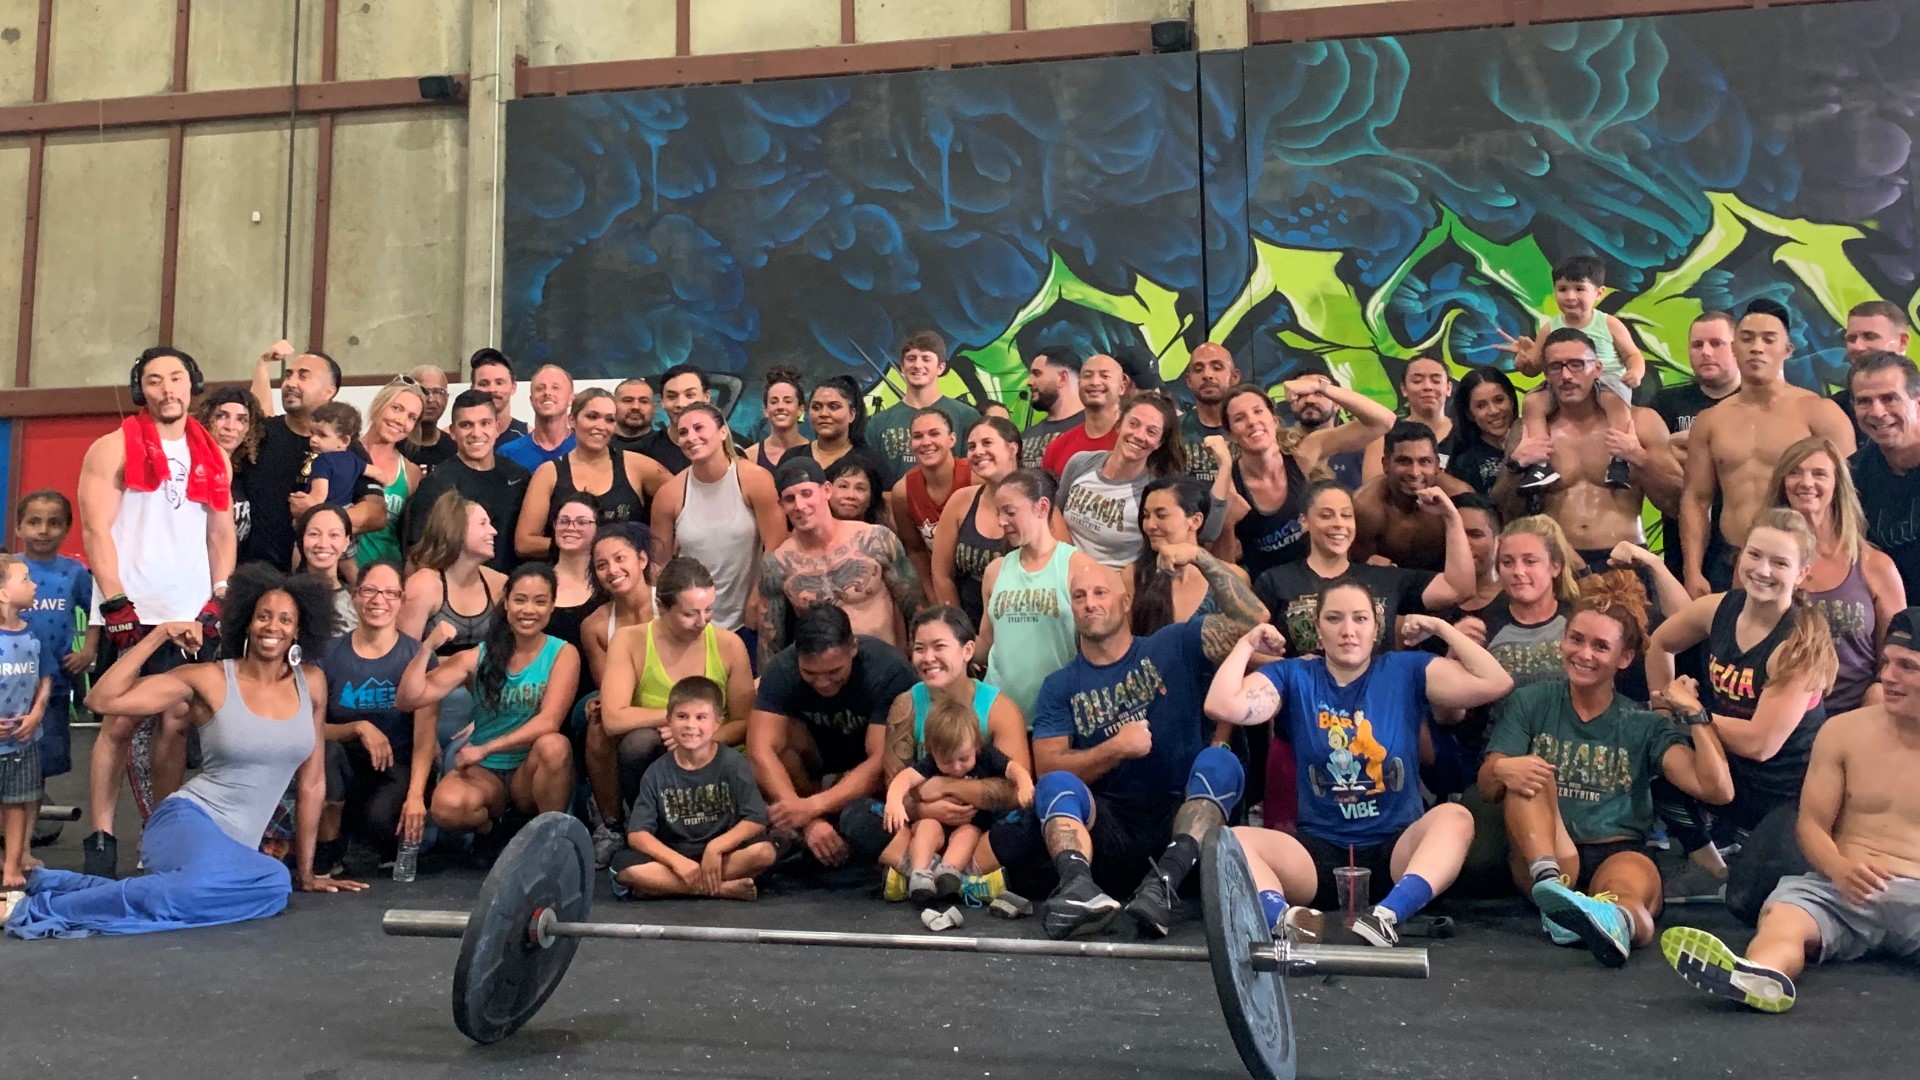 The workout at CrossFit 209 Sport on Friday lasted for 34 minutes for the 34 people all presumed to have died in the boat fire.